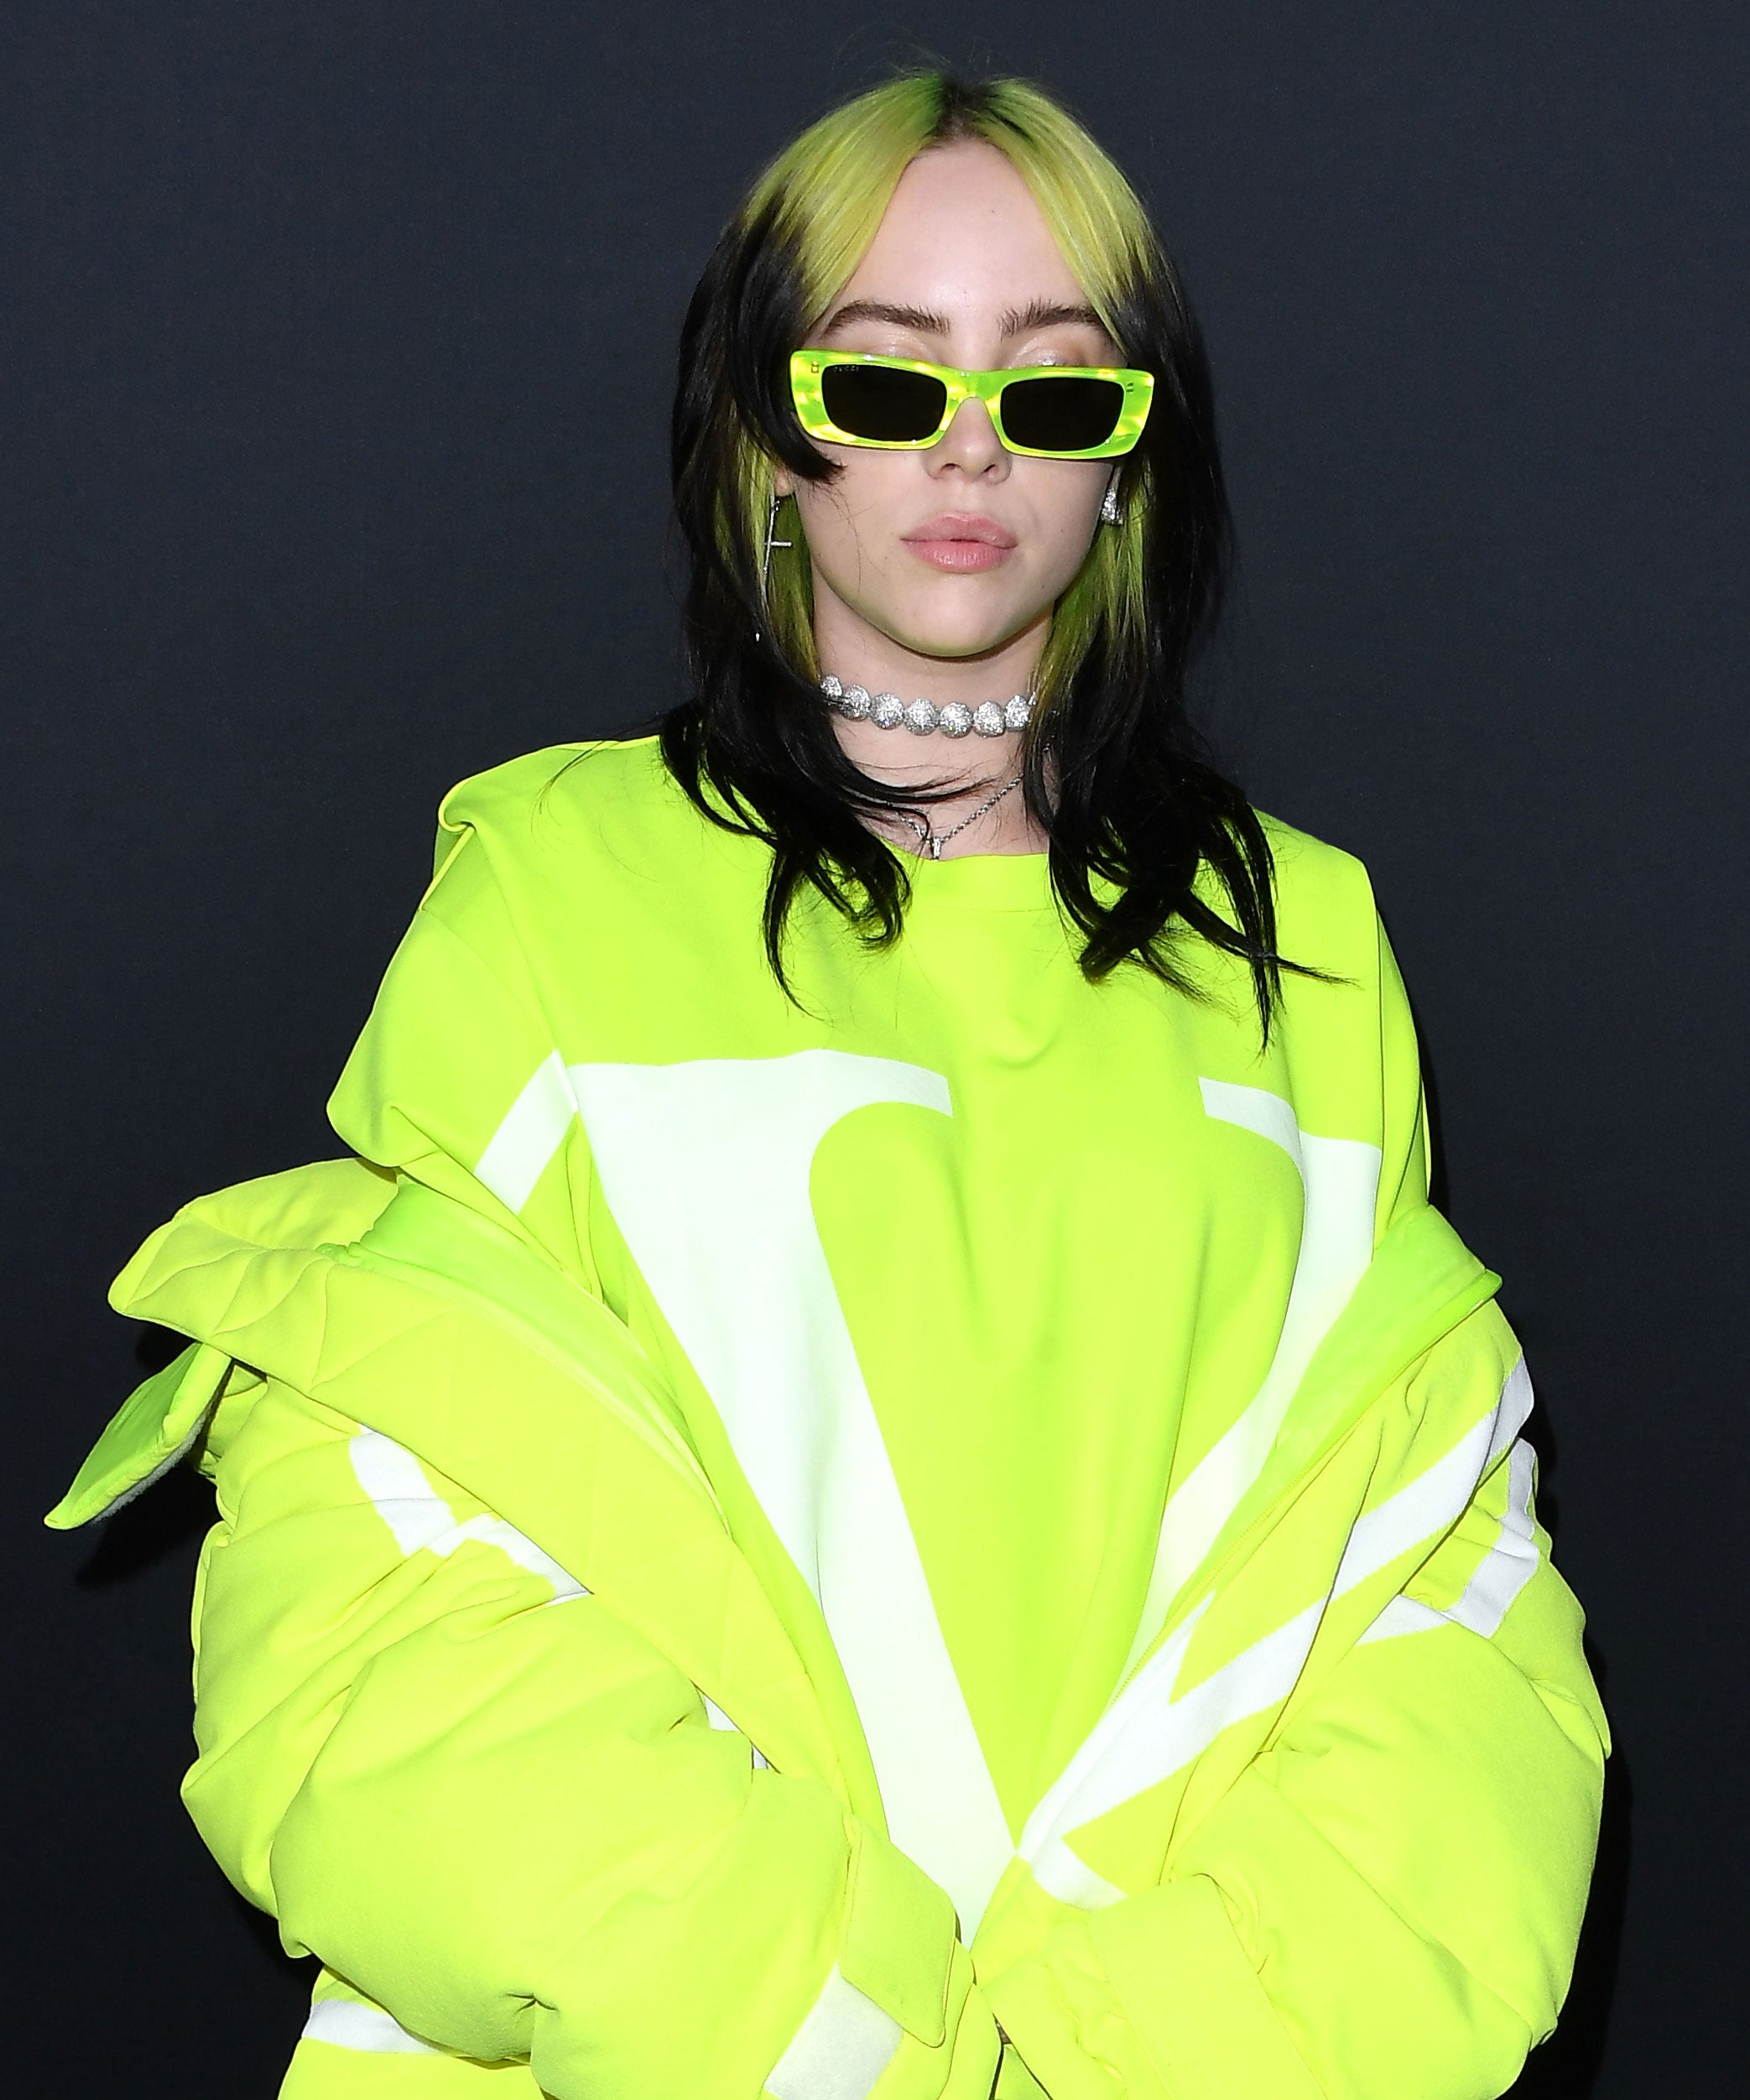 Billie Eilish Reveals She Almost Took Her Own Life